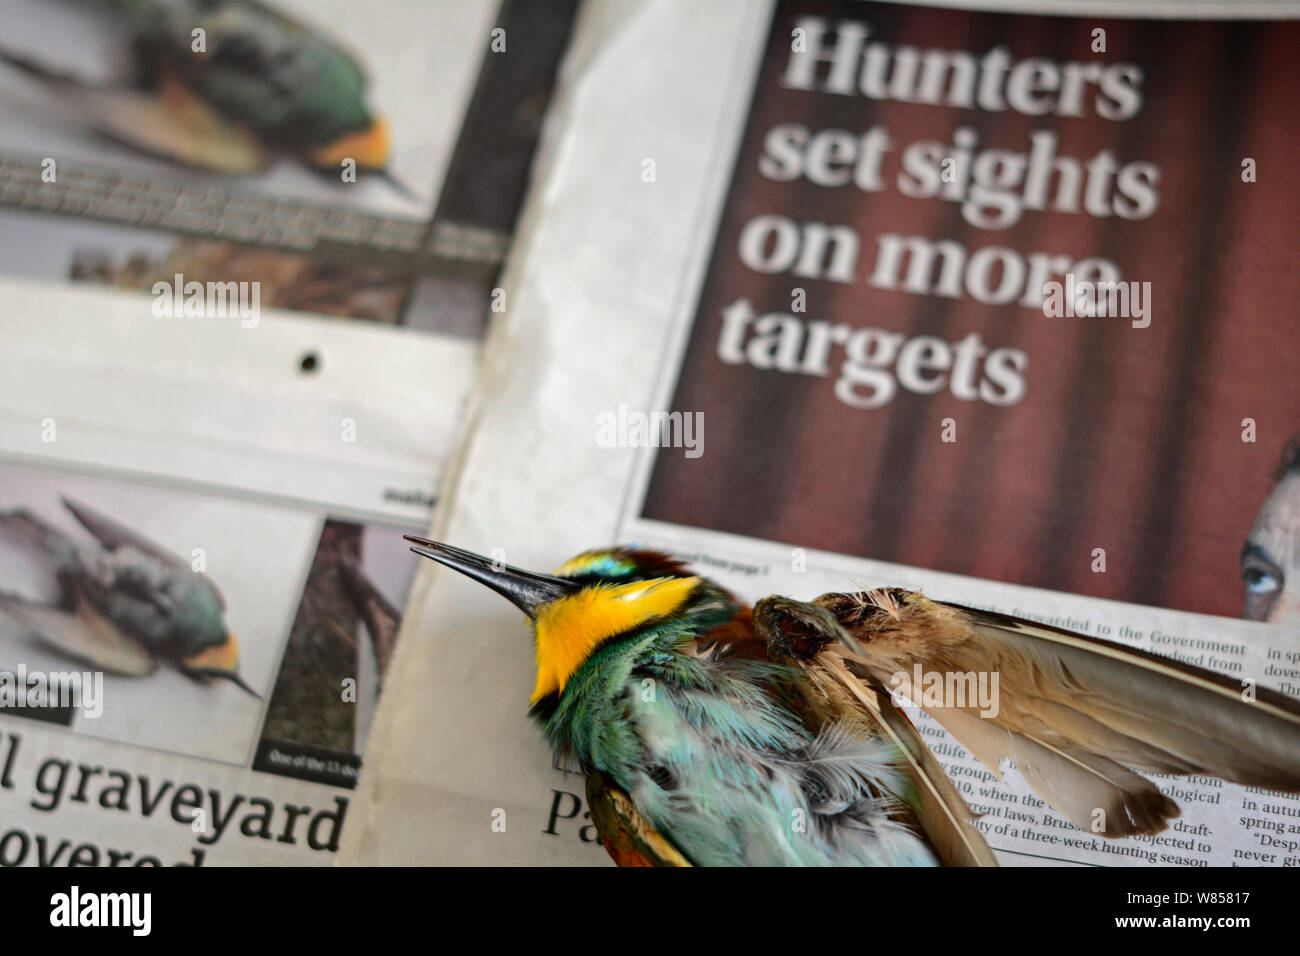 Bee-eater (Merops apiaster) shot in wing by hunter, dead after being euphanised by vet, placed on newspaper which shows article about hunting, BirdLife Malta Springwatch Camp 2013, Malta, April 2013 Stock Photo